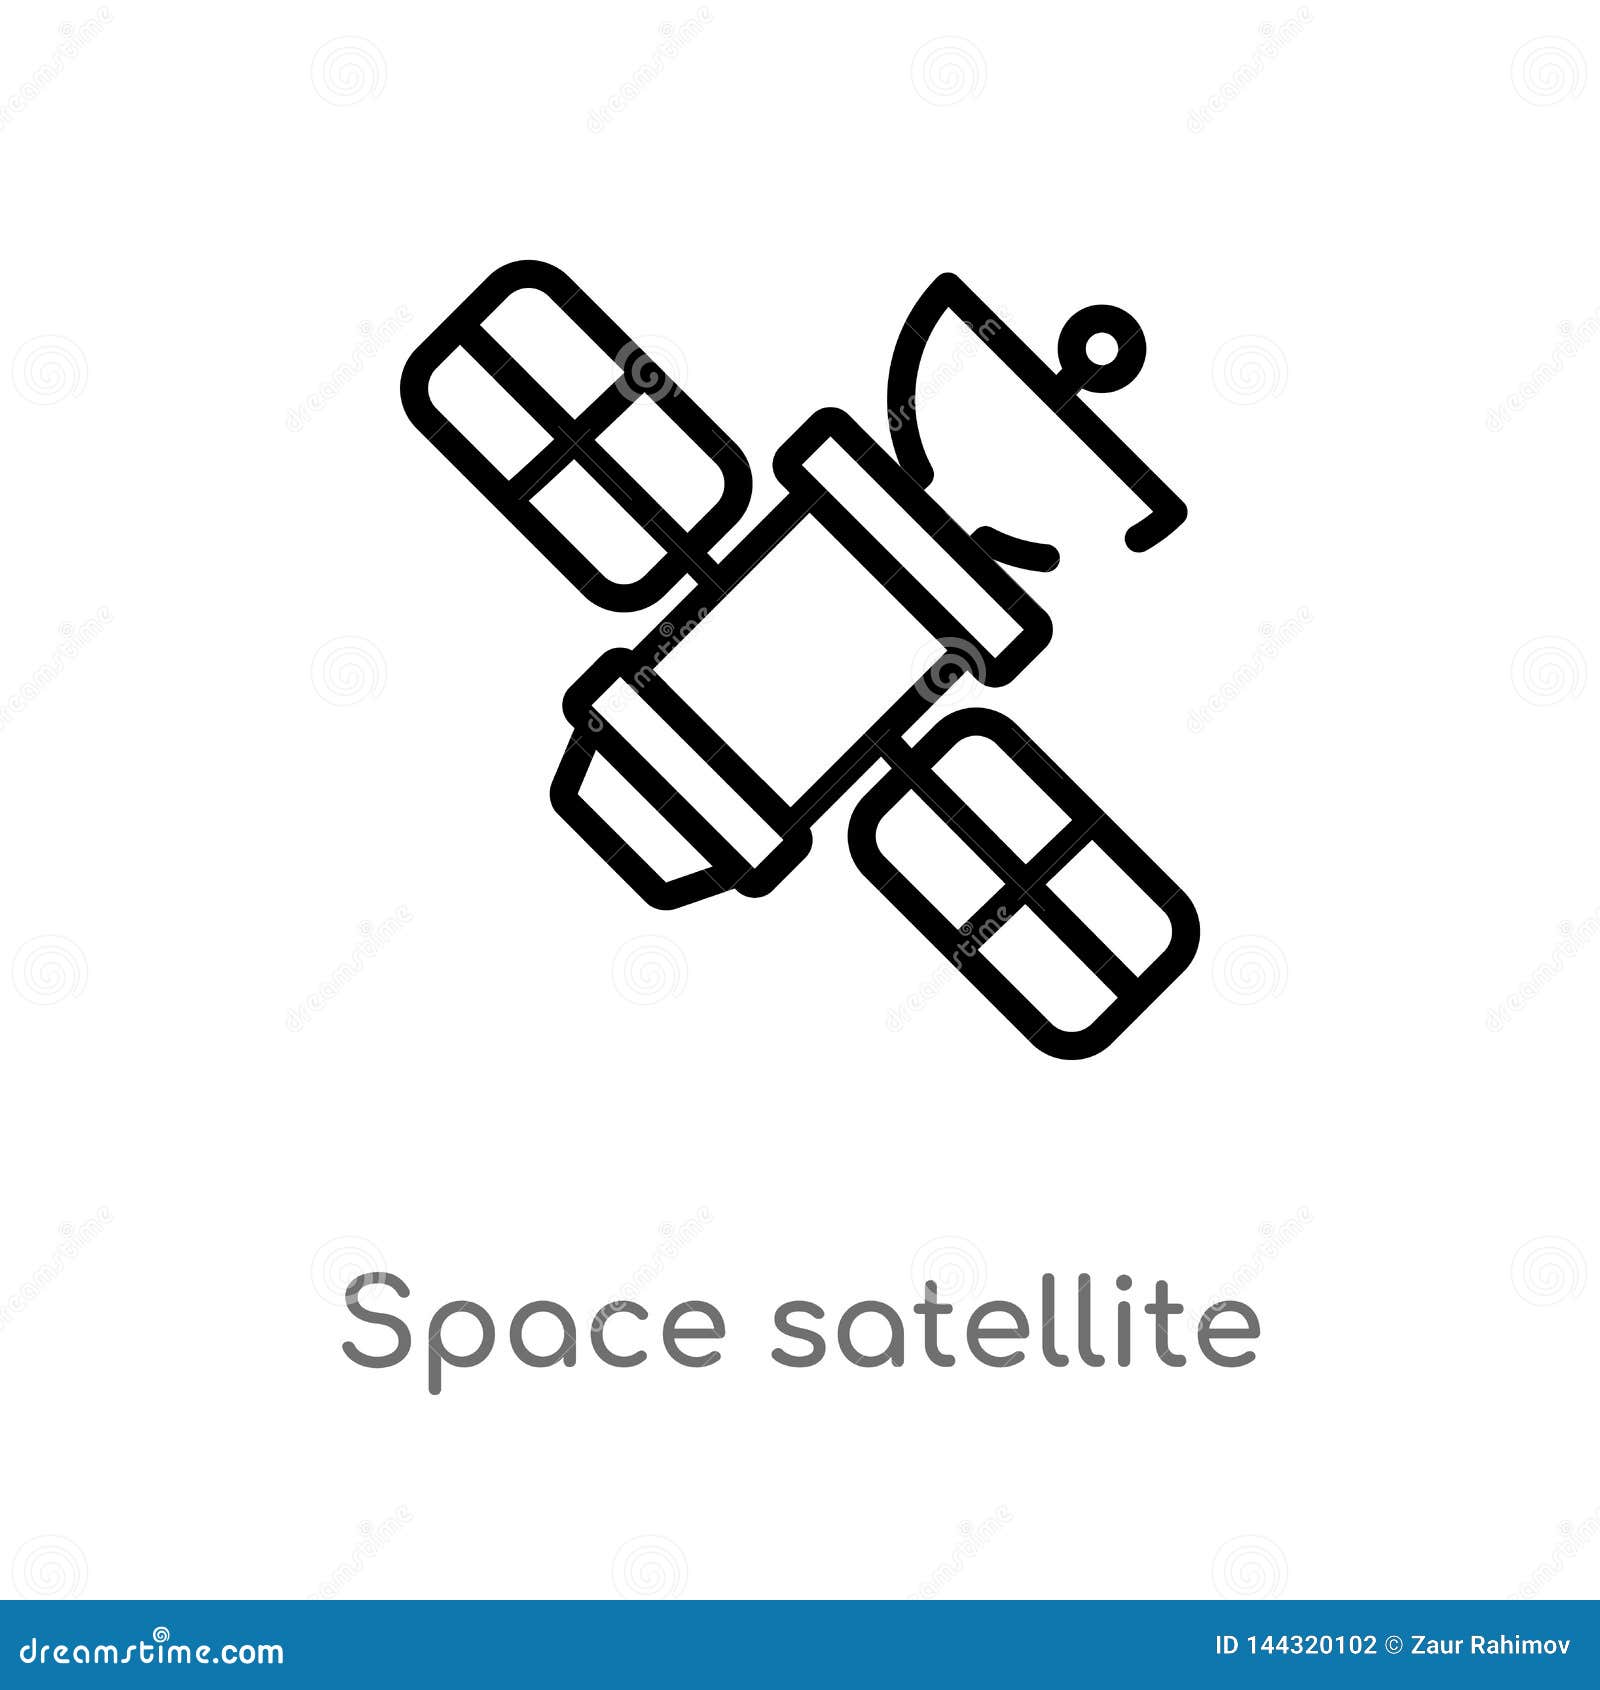 Outline Space Satellite Vector Icon. Isolated Black Simple Line Element